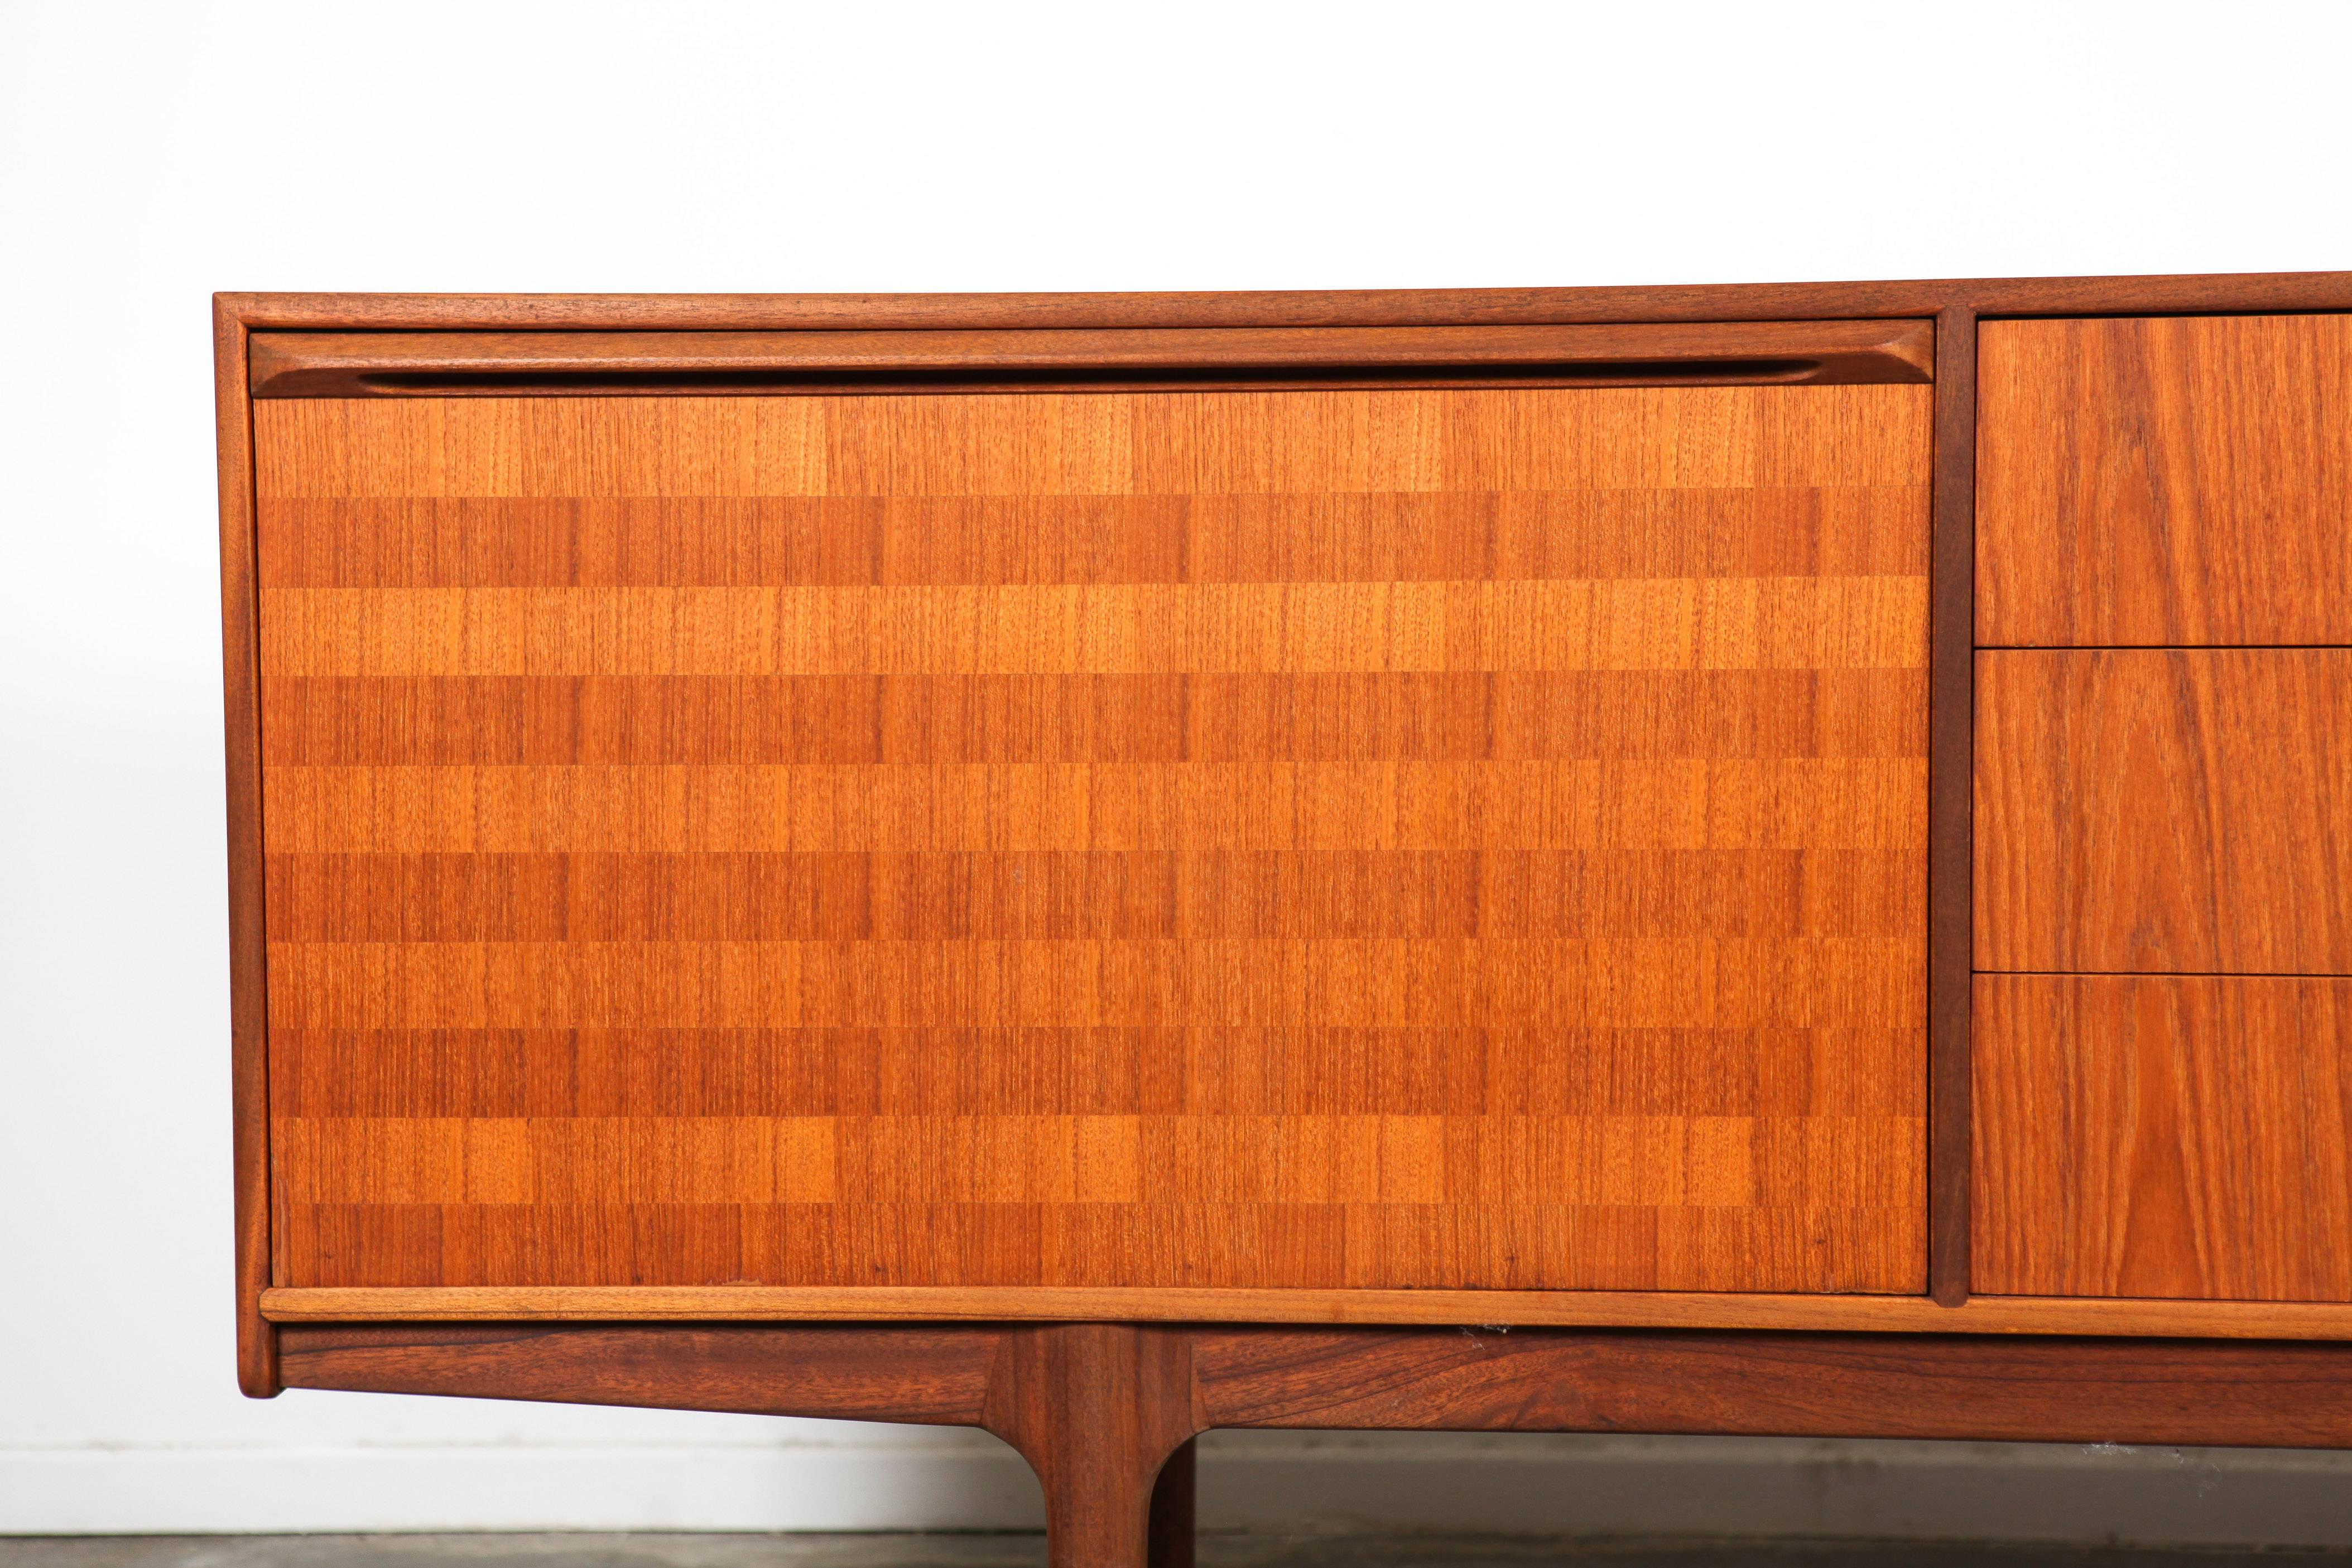 Teak Mid-Century Modern sideboard by McIntosh, rare model with beautiful patterned inlay on the doors and three circular drawer handles.